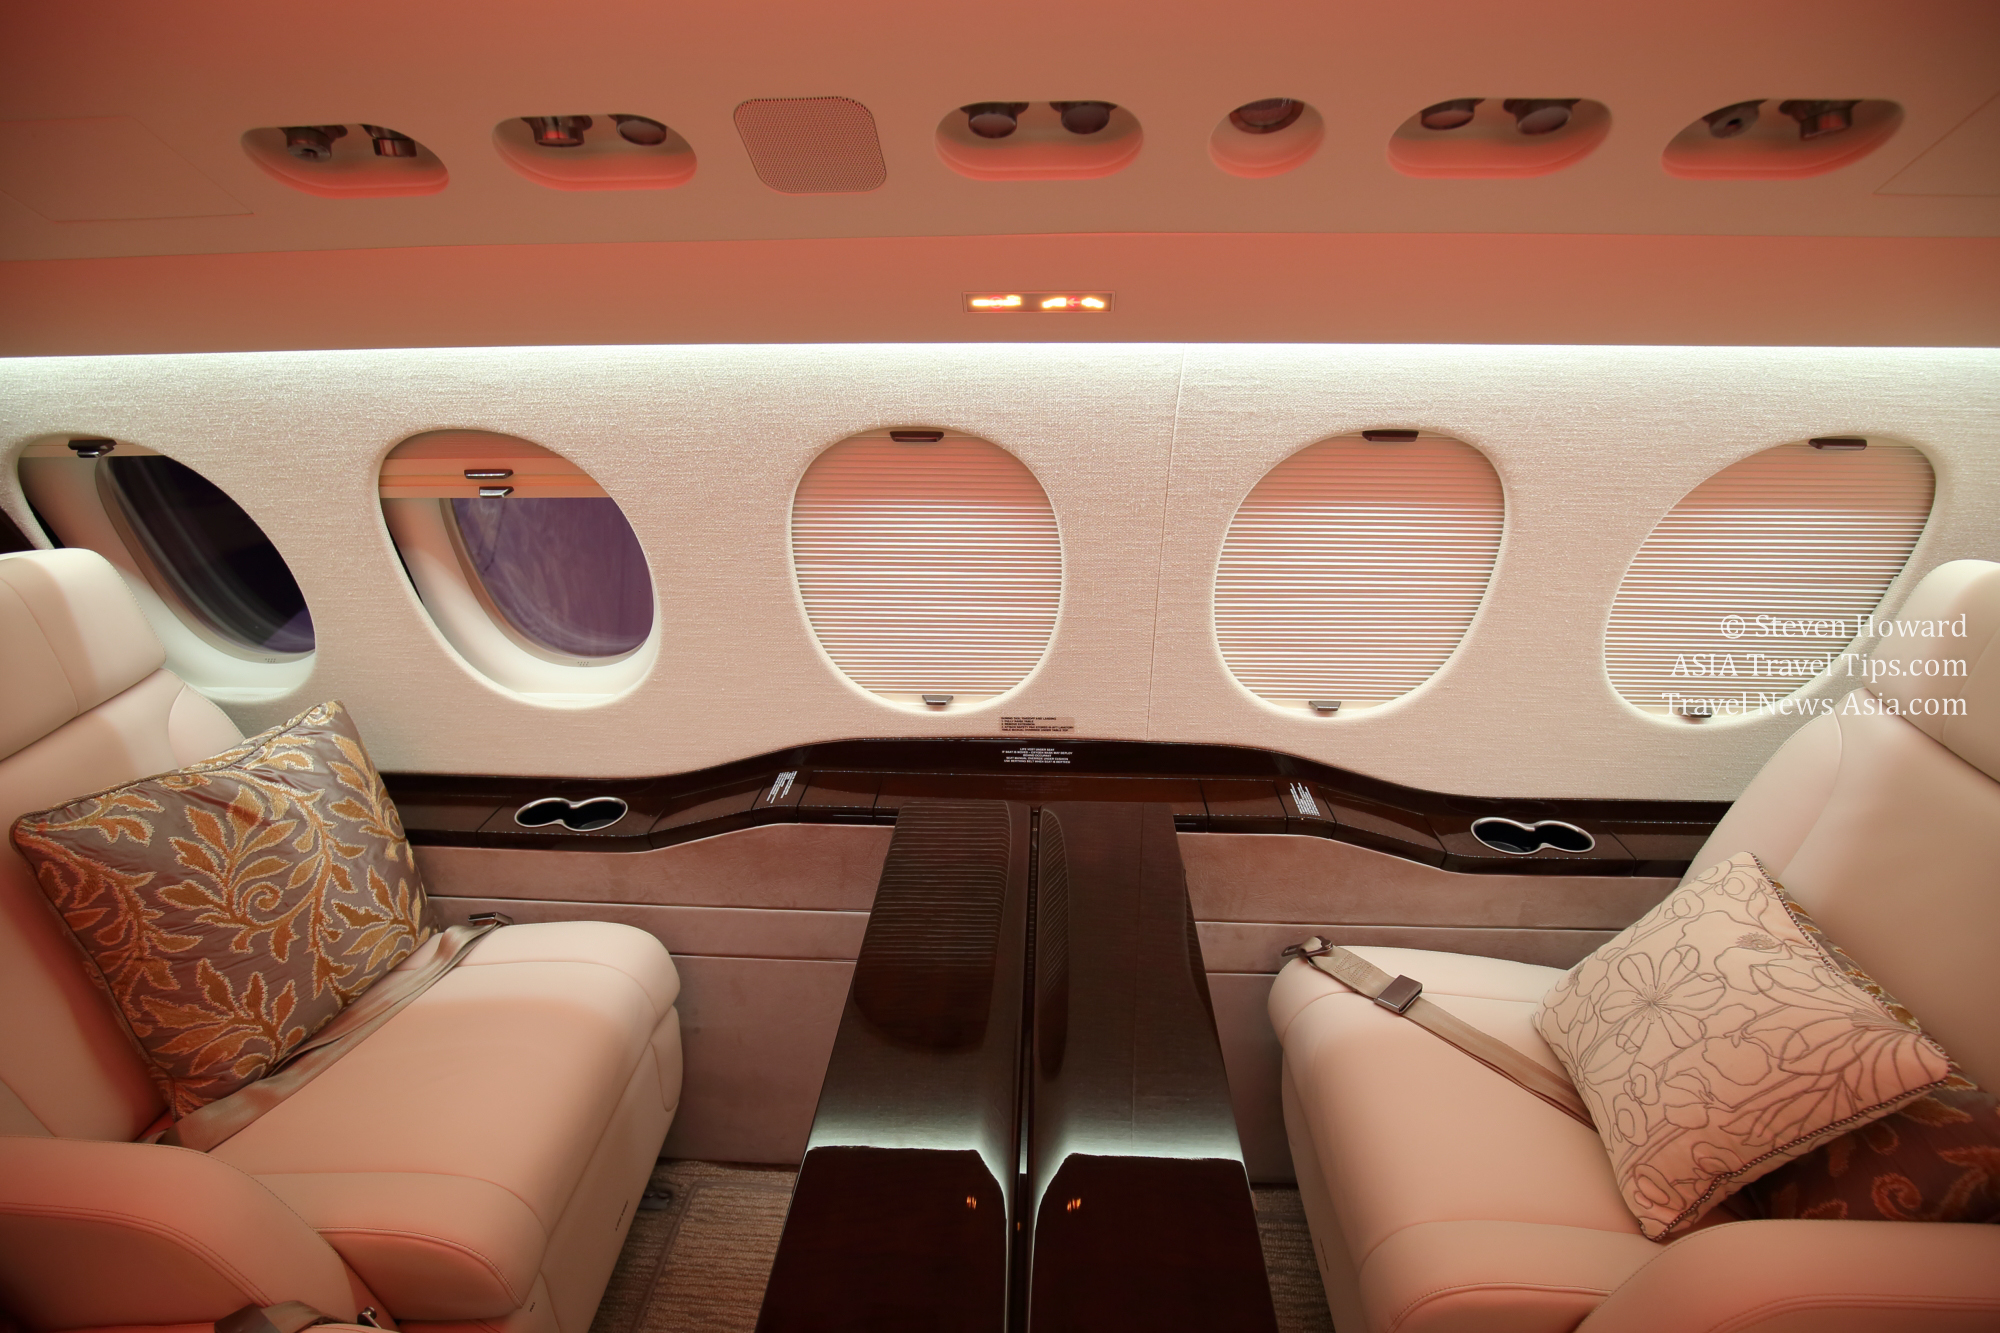 Luxurious seats onboard a Dassault Falcon 8X at Don Mueang Airport in Bangkok, Thailand. Picture by Steven Howard of TravelNewsAsia.com Click to enlarge.